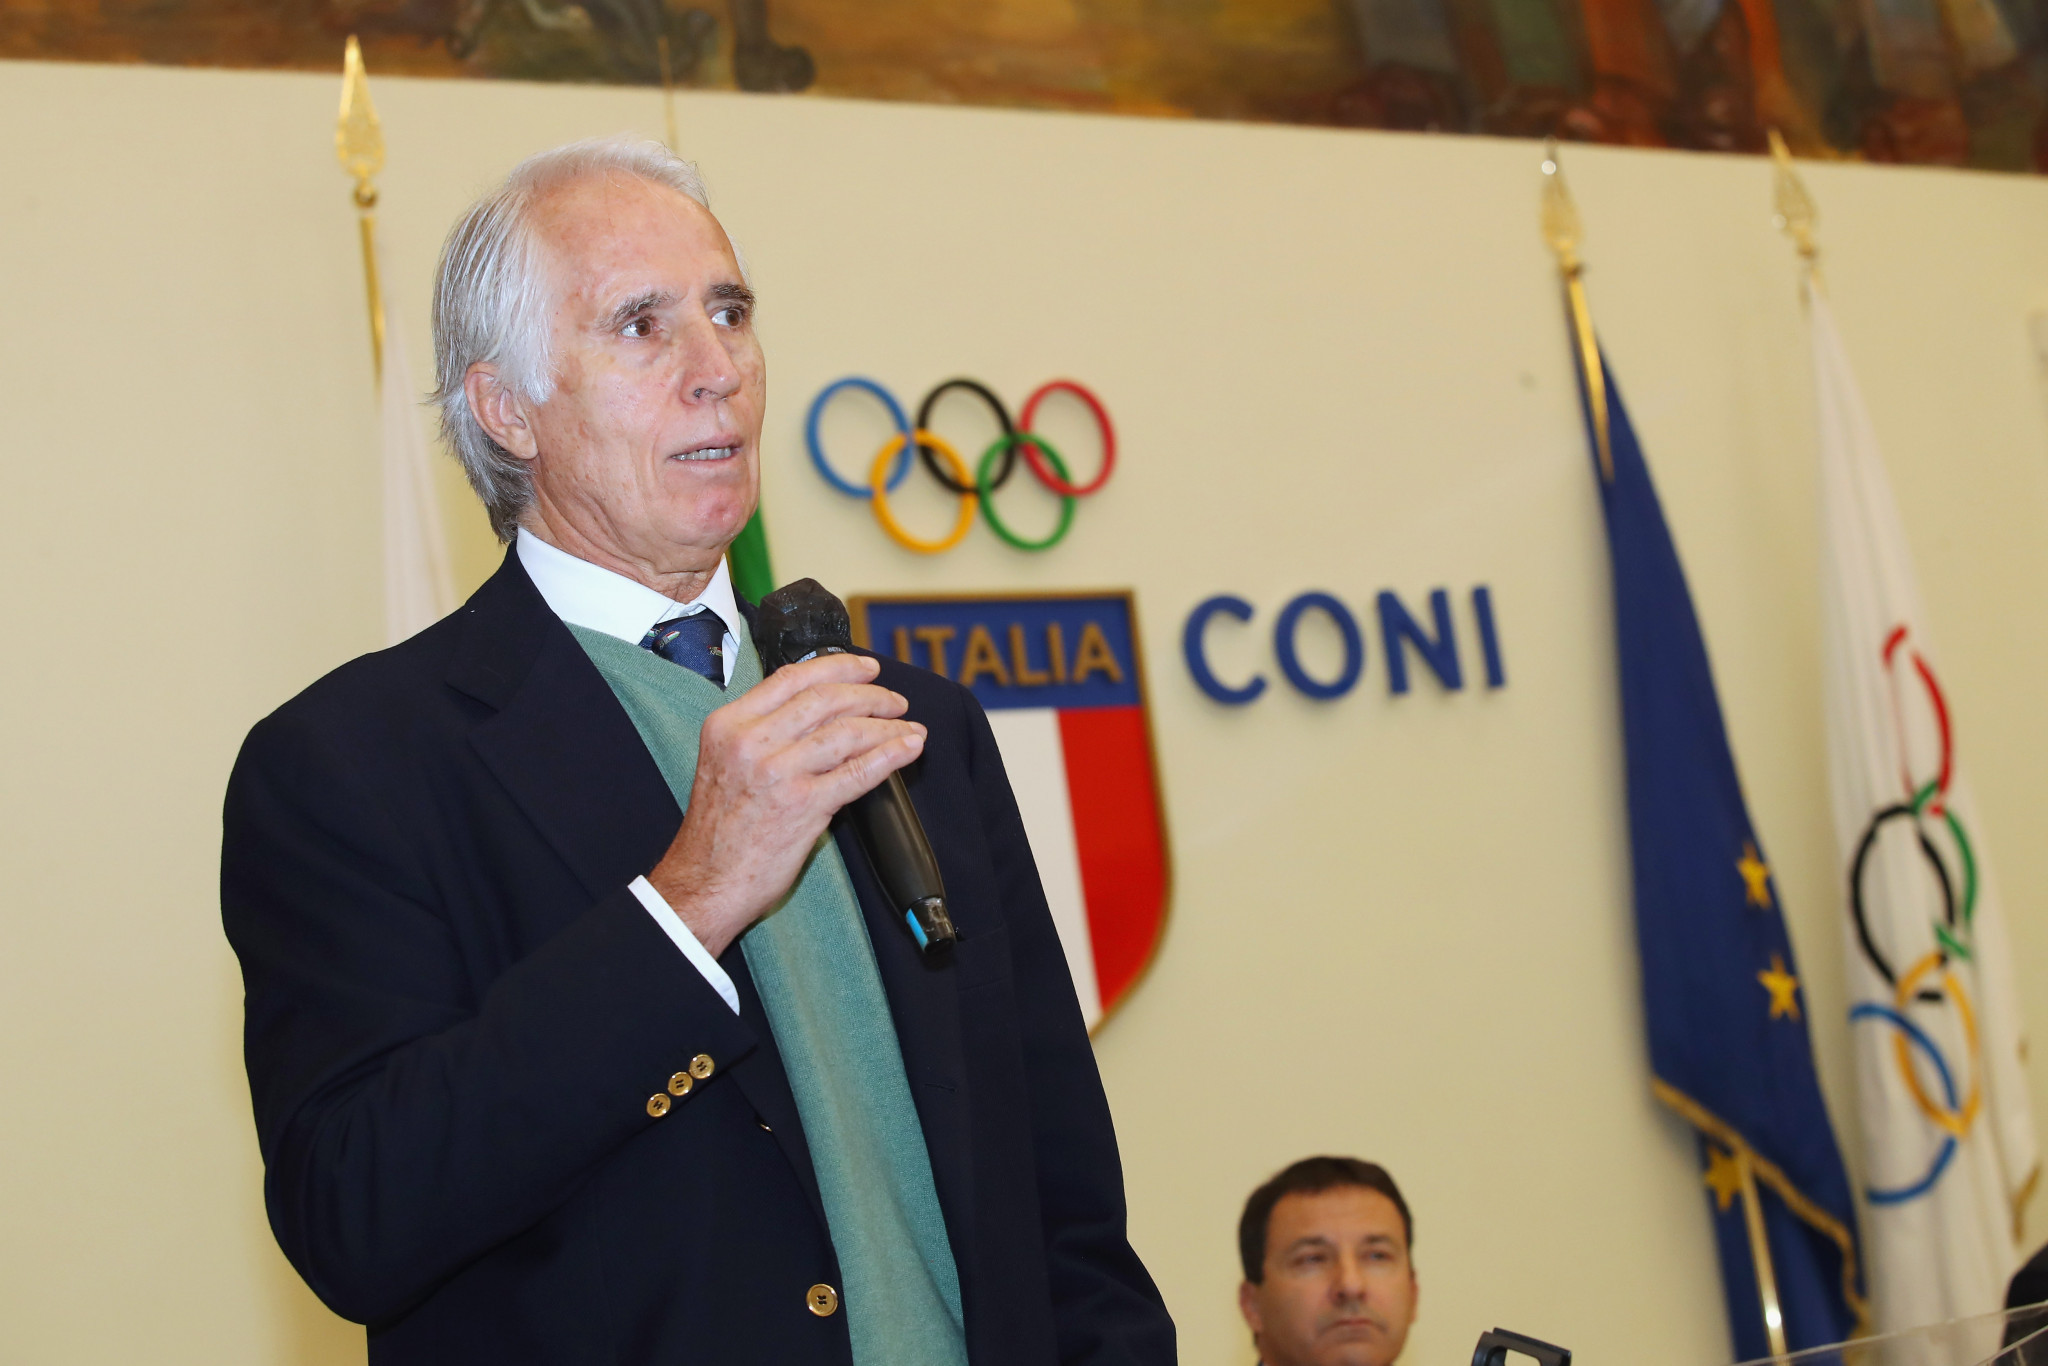 Milan Cortina 2026 President Giovanni Malagò insisted that sports facilities are "the priority" for the Winter Olympics and Paralympics ©Getty Images